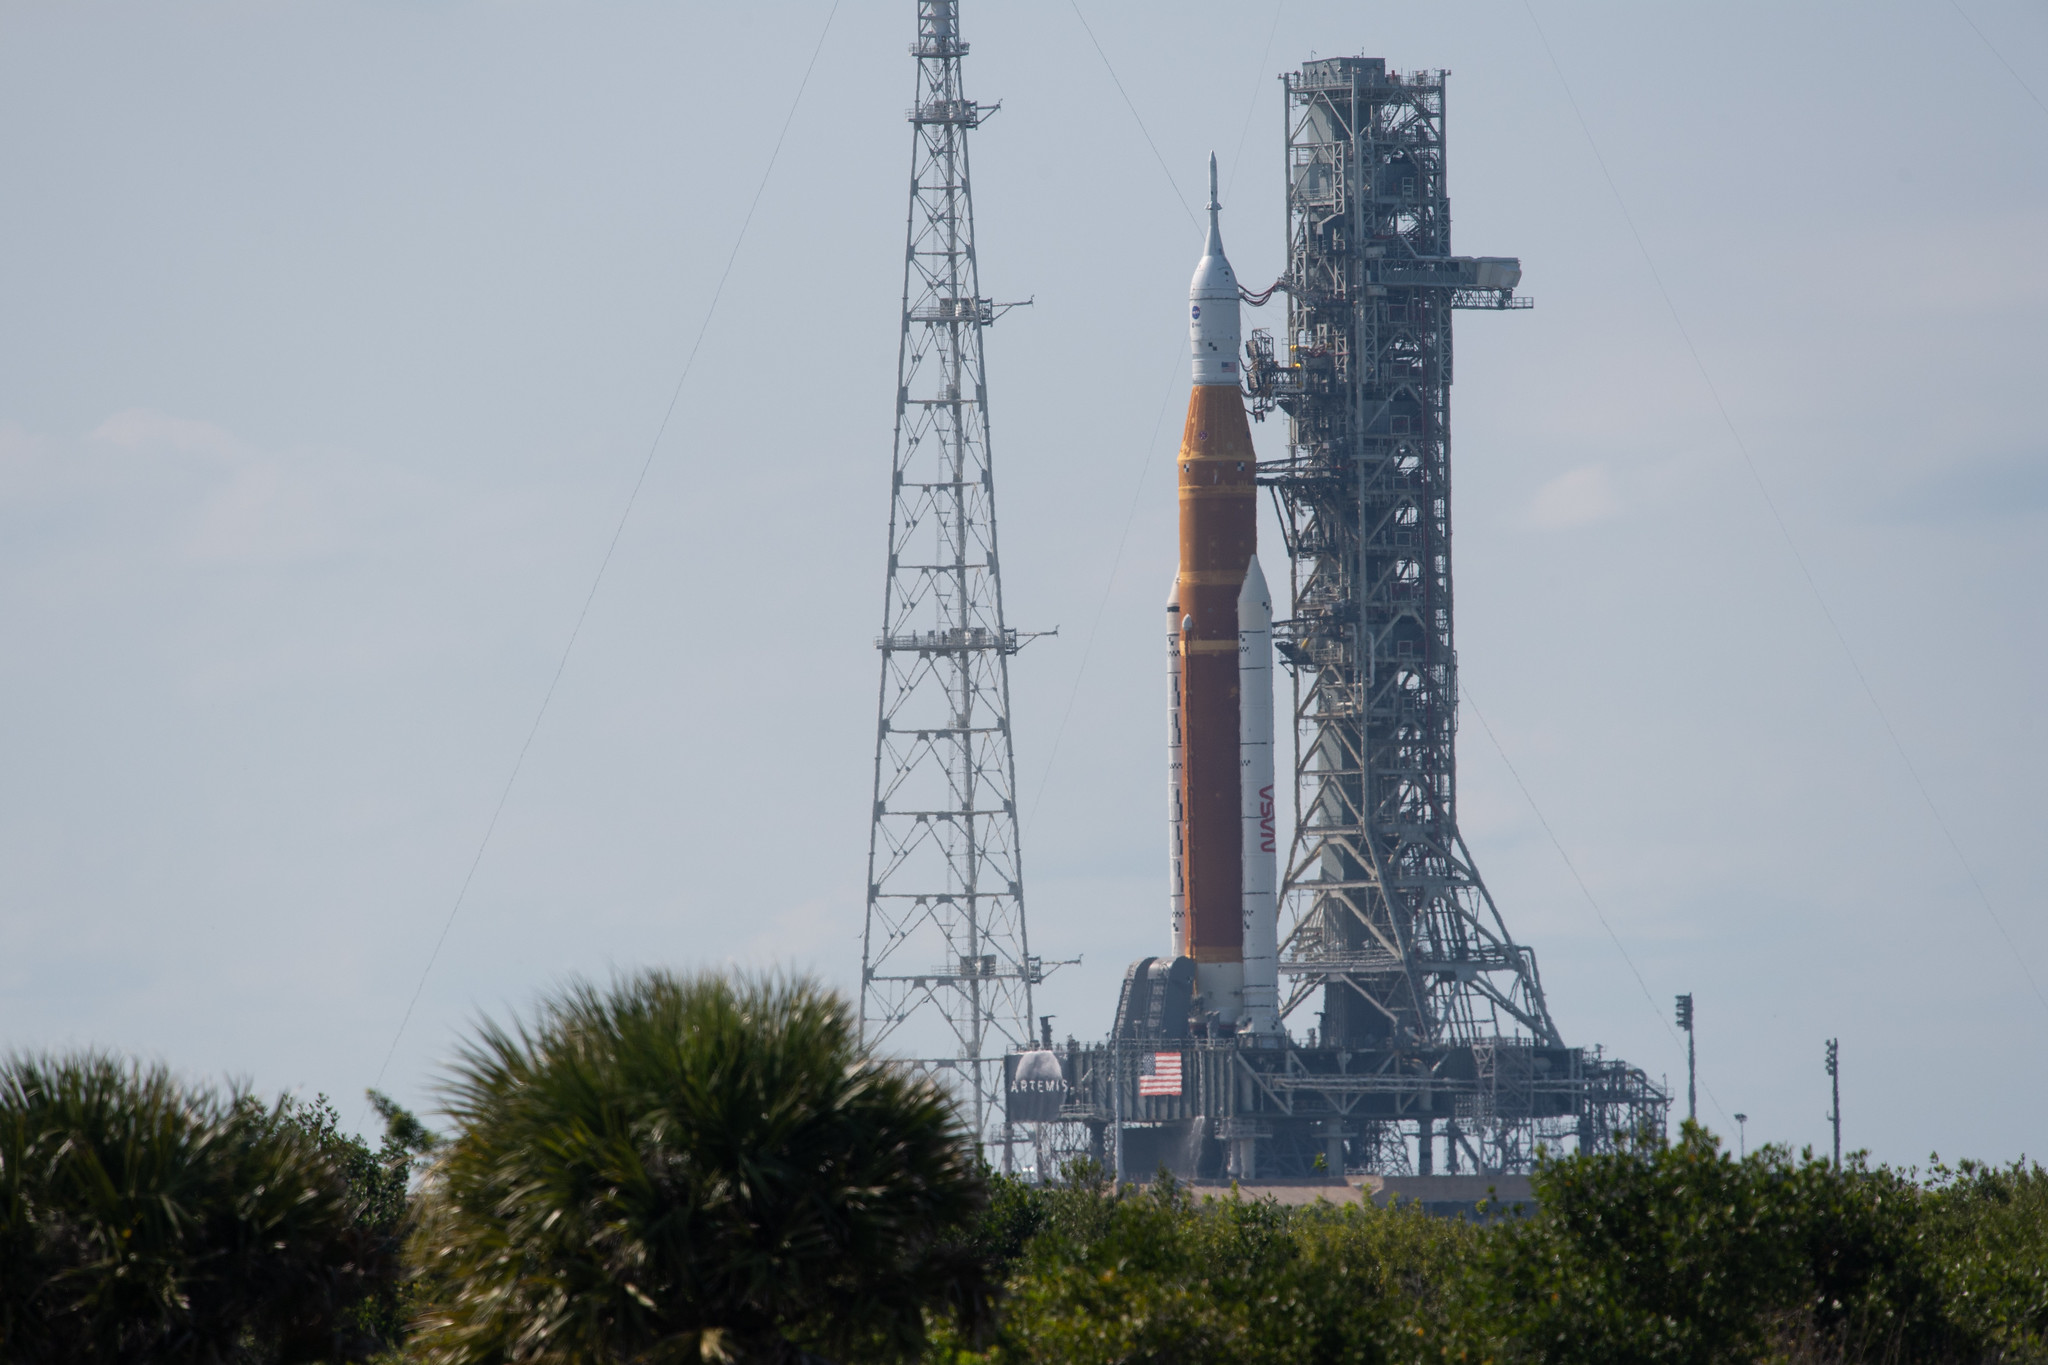 NASA’s Space Launch System (SLS) rocket with the Orion spacecraft aboard is seen atop a mobile launcher at Launch Complex 39B, Monday, April 4, 2022.